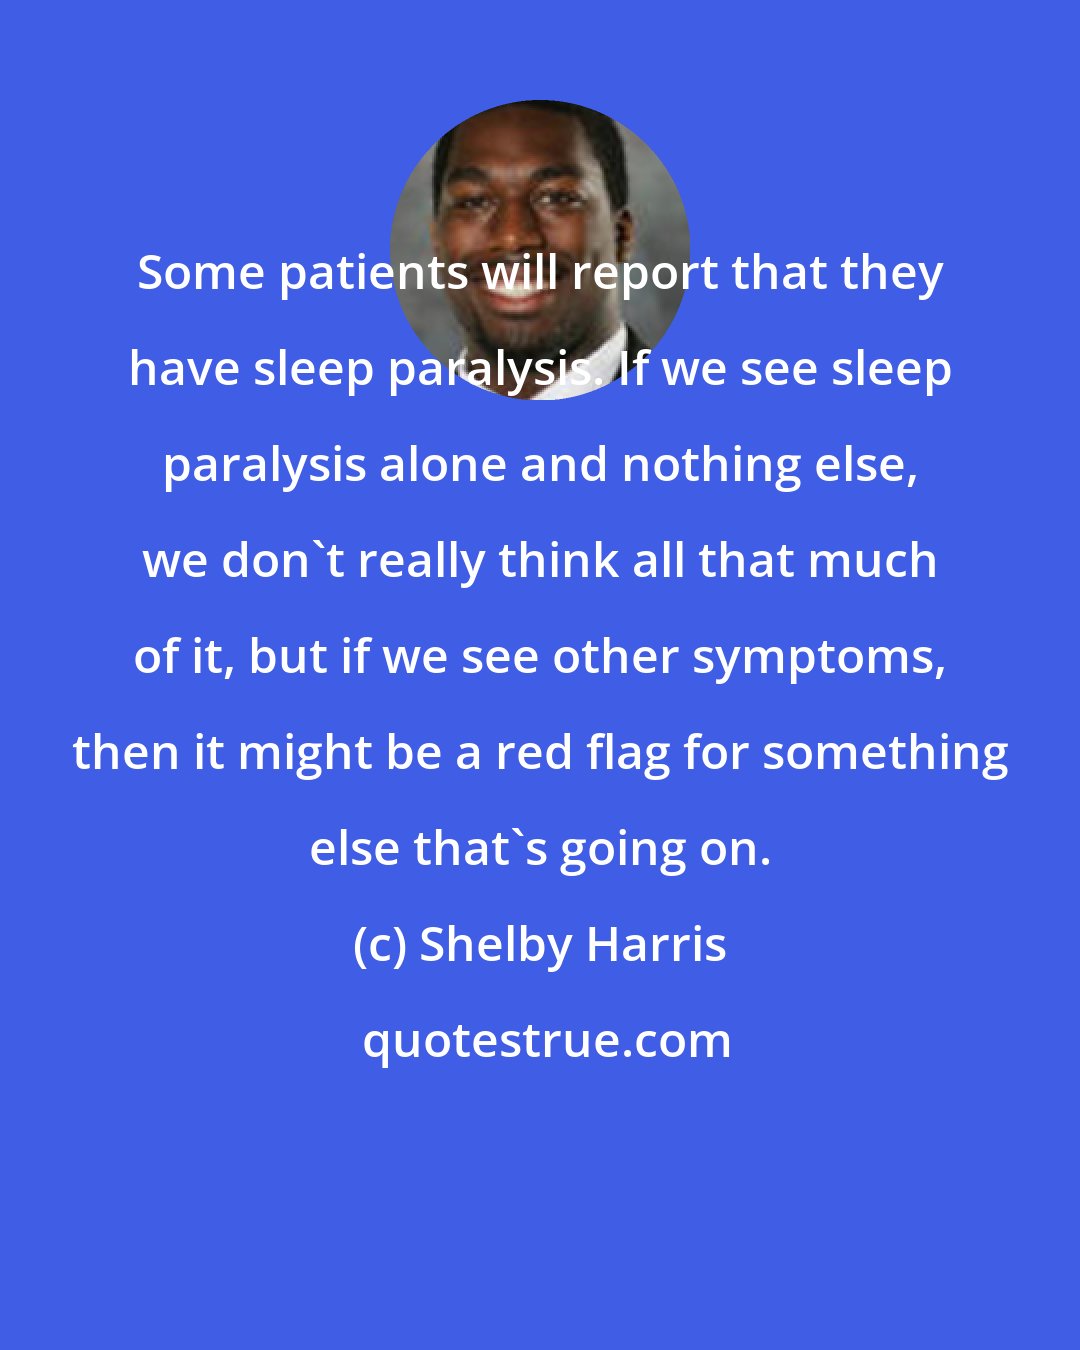 Shelby Harris: Some patients will report that they have sleep paralysis. If we see sleep paralysis alone and nothing else, we don't really think all that much of it, but if we see other symptoms, then it might be a red flag for something else that's going on.